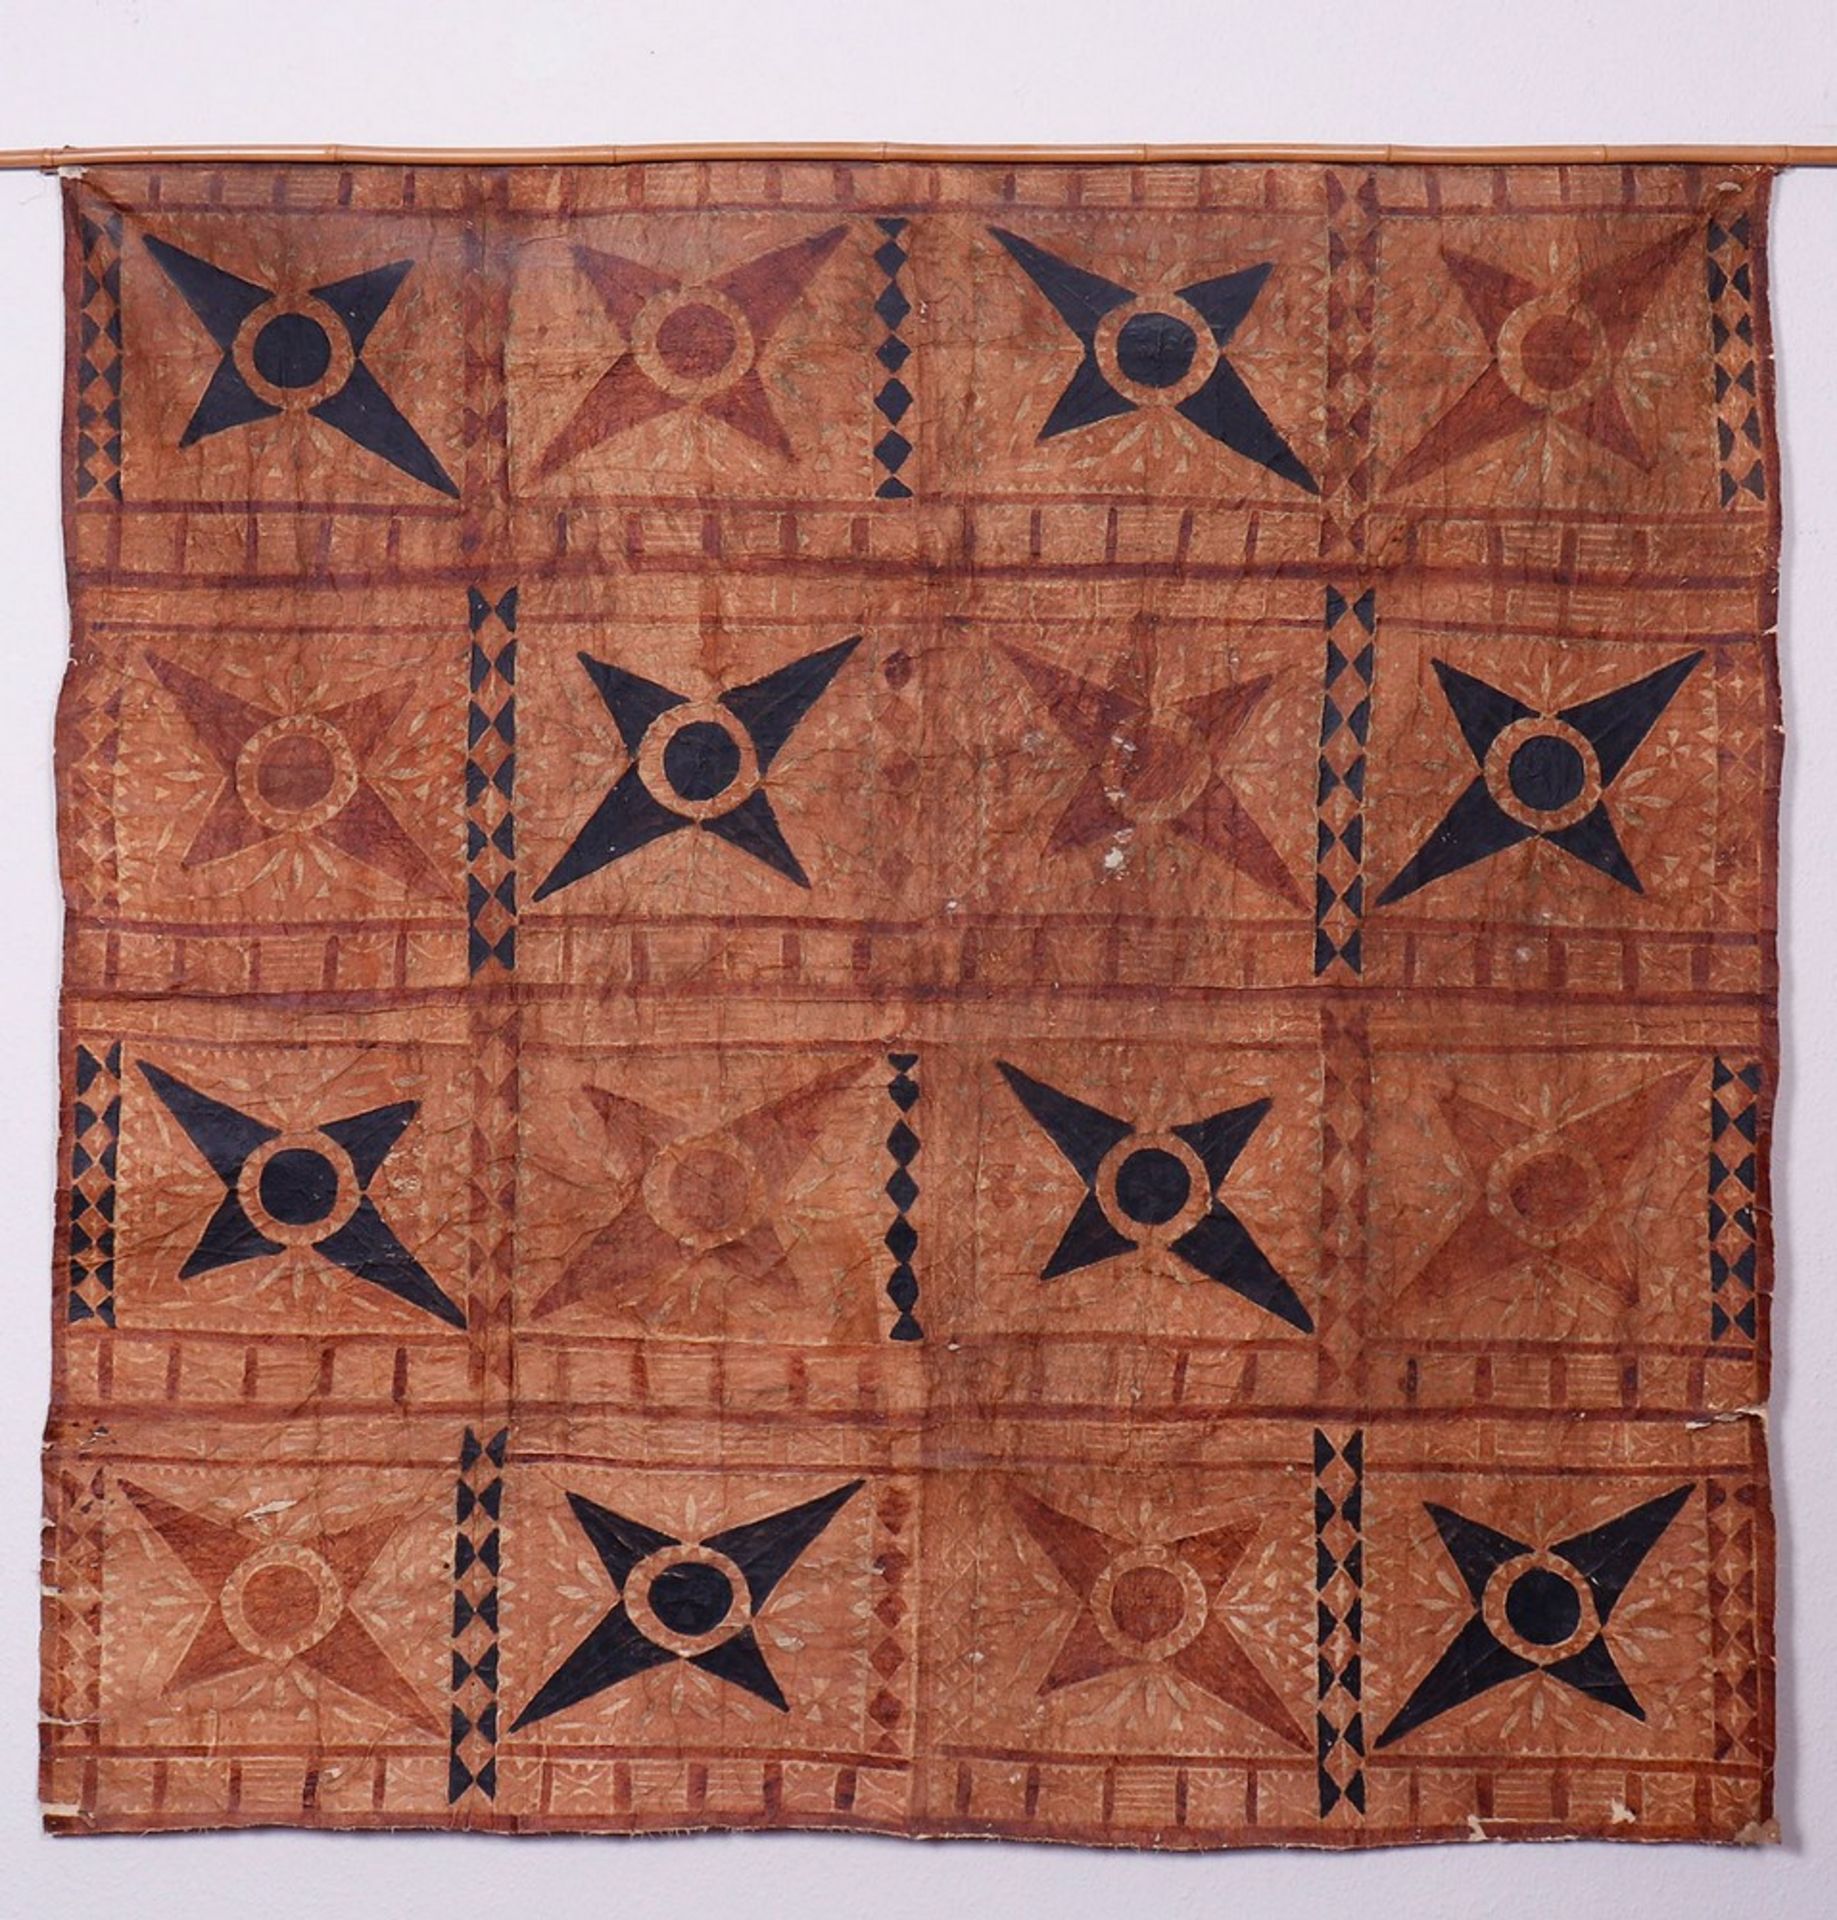 Tapa wall hanging, probably Polynesia, early 20th C.